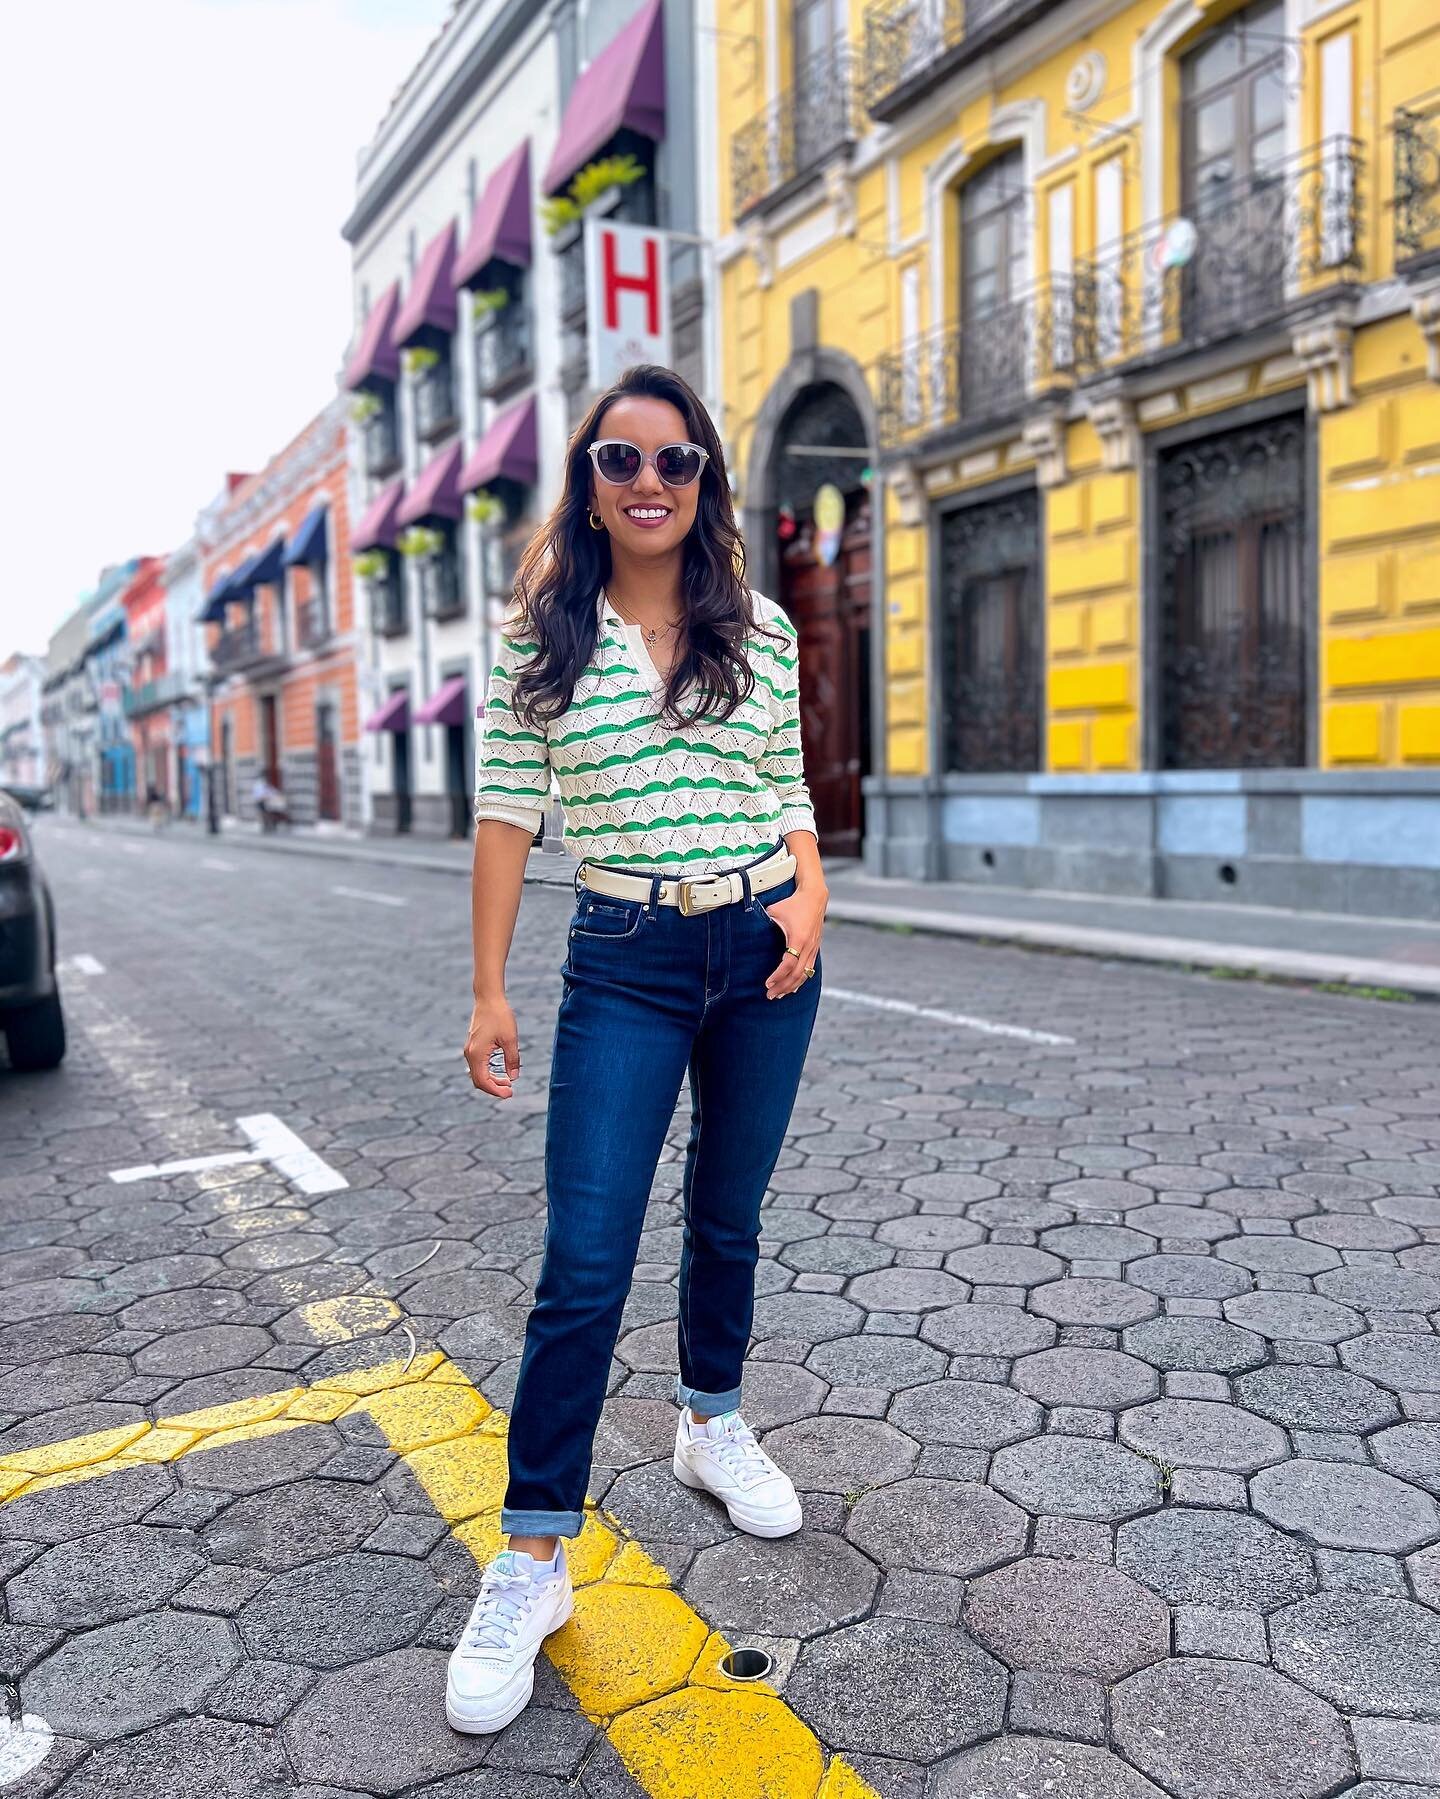 Shout out to the best travel companion for my mexican adventures: @mavijeans 🇲🇽✌🏽 Easy to mix and match with any other piece in my suitcase that even packing turns smoother! 🧳 #FashionTopic 
&bull;
&bull;
&bull;
&bull;
#moveinmavi #MaviAllBlue #s